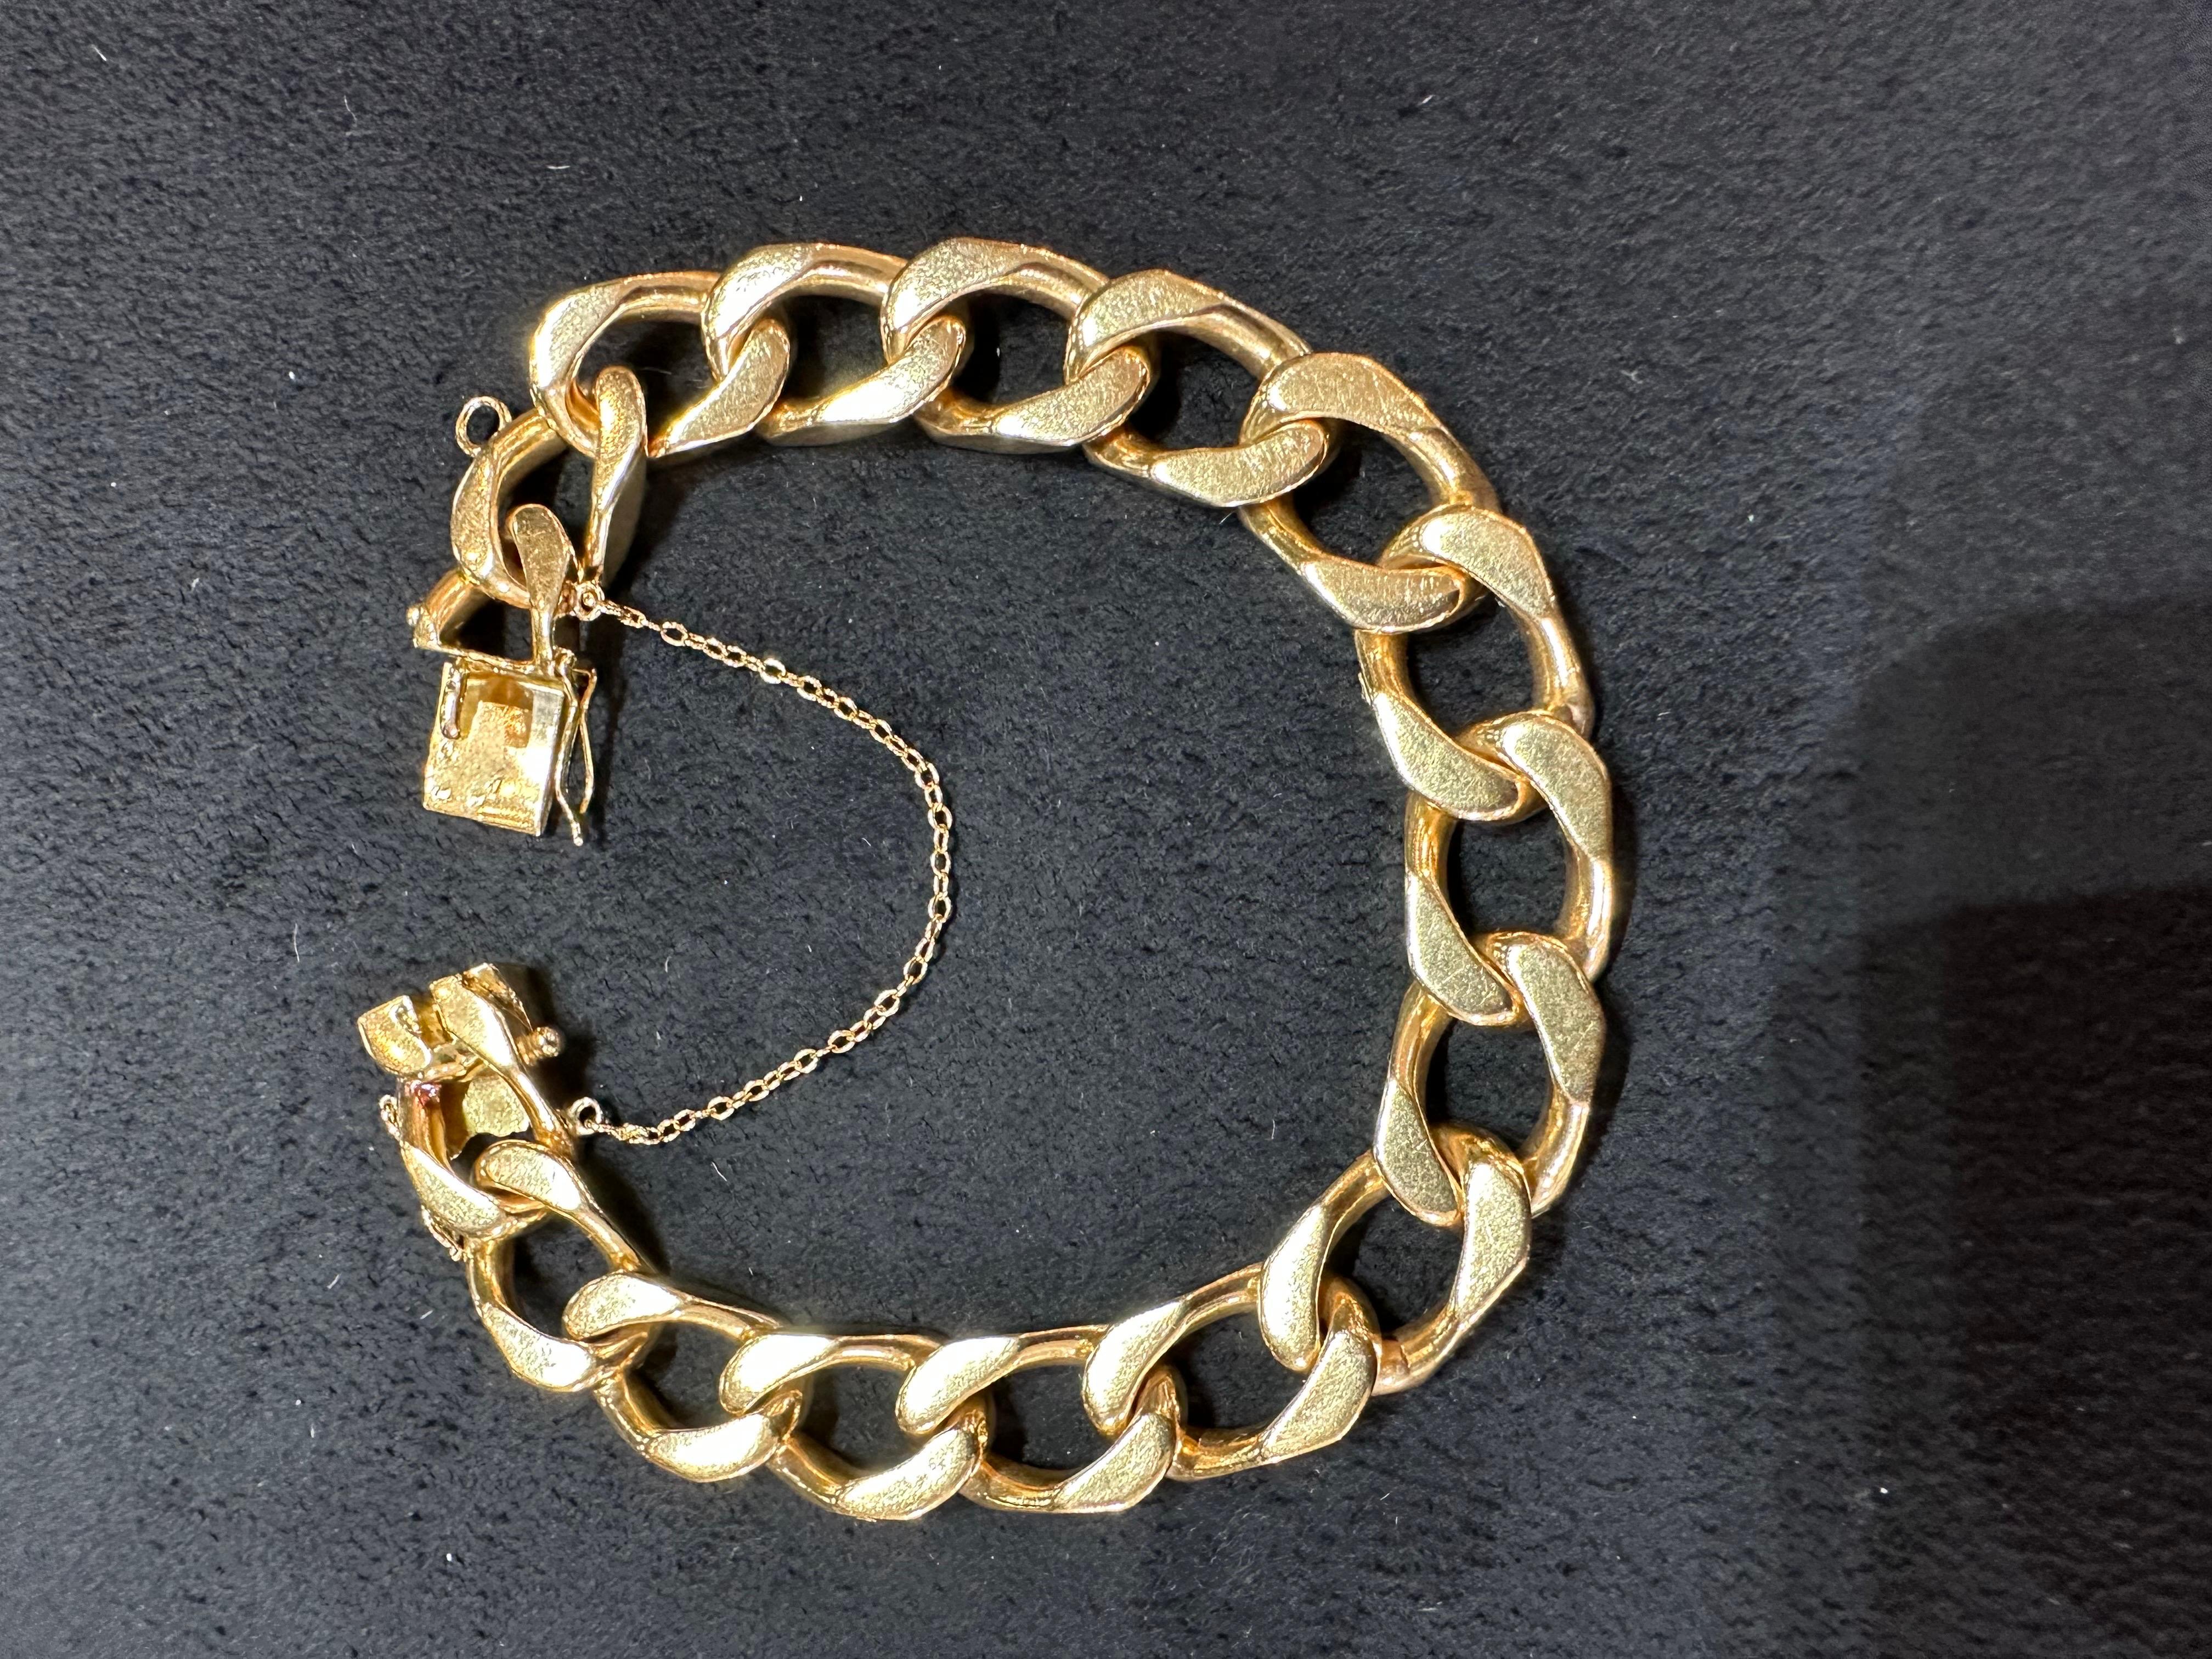 Bracelet Mesh Gourmette Year 1960 Solid Gold 18 Carats 3